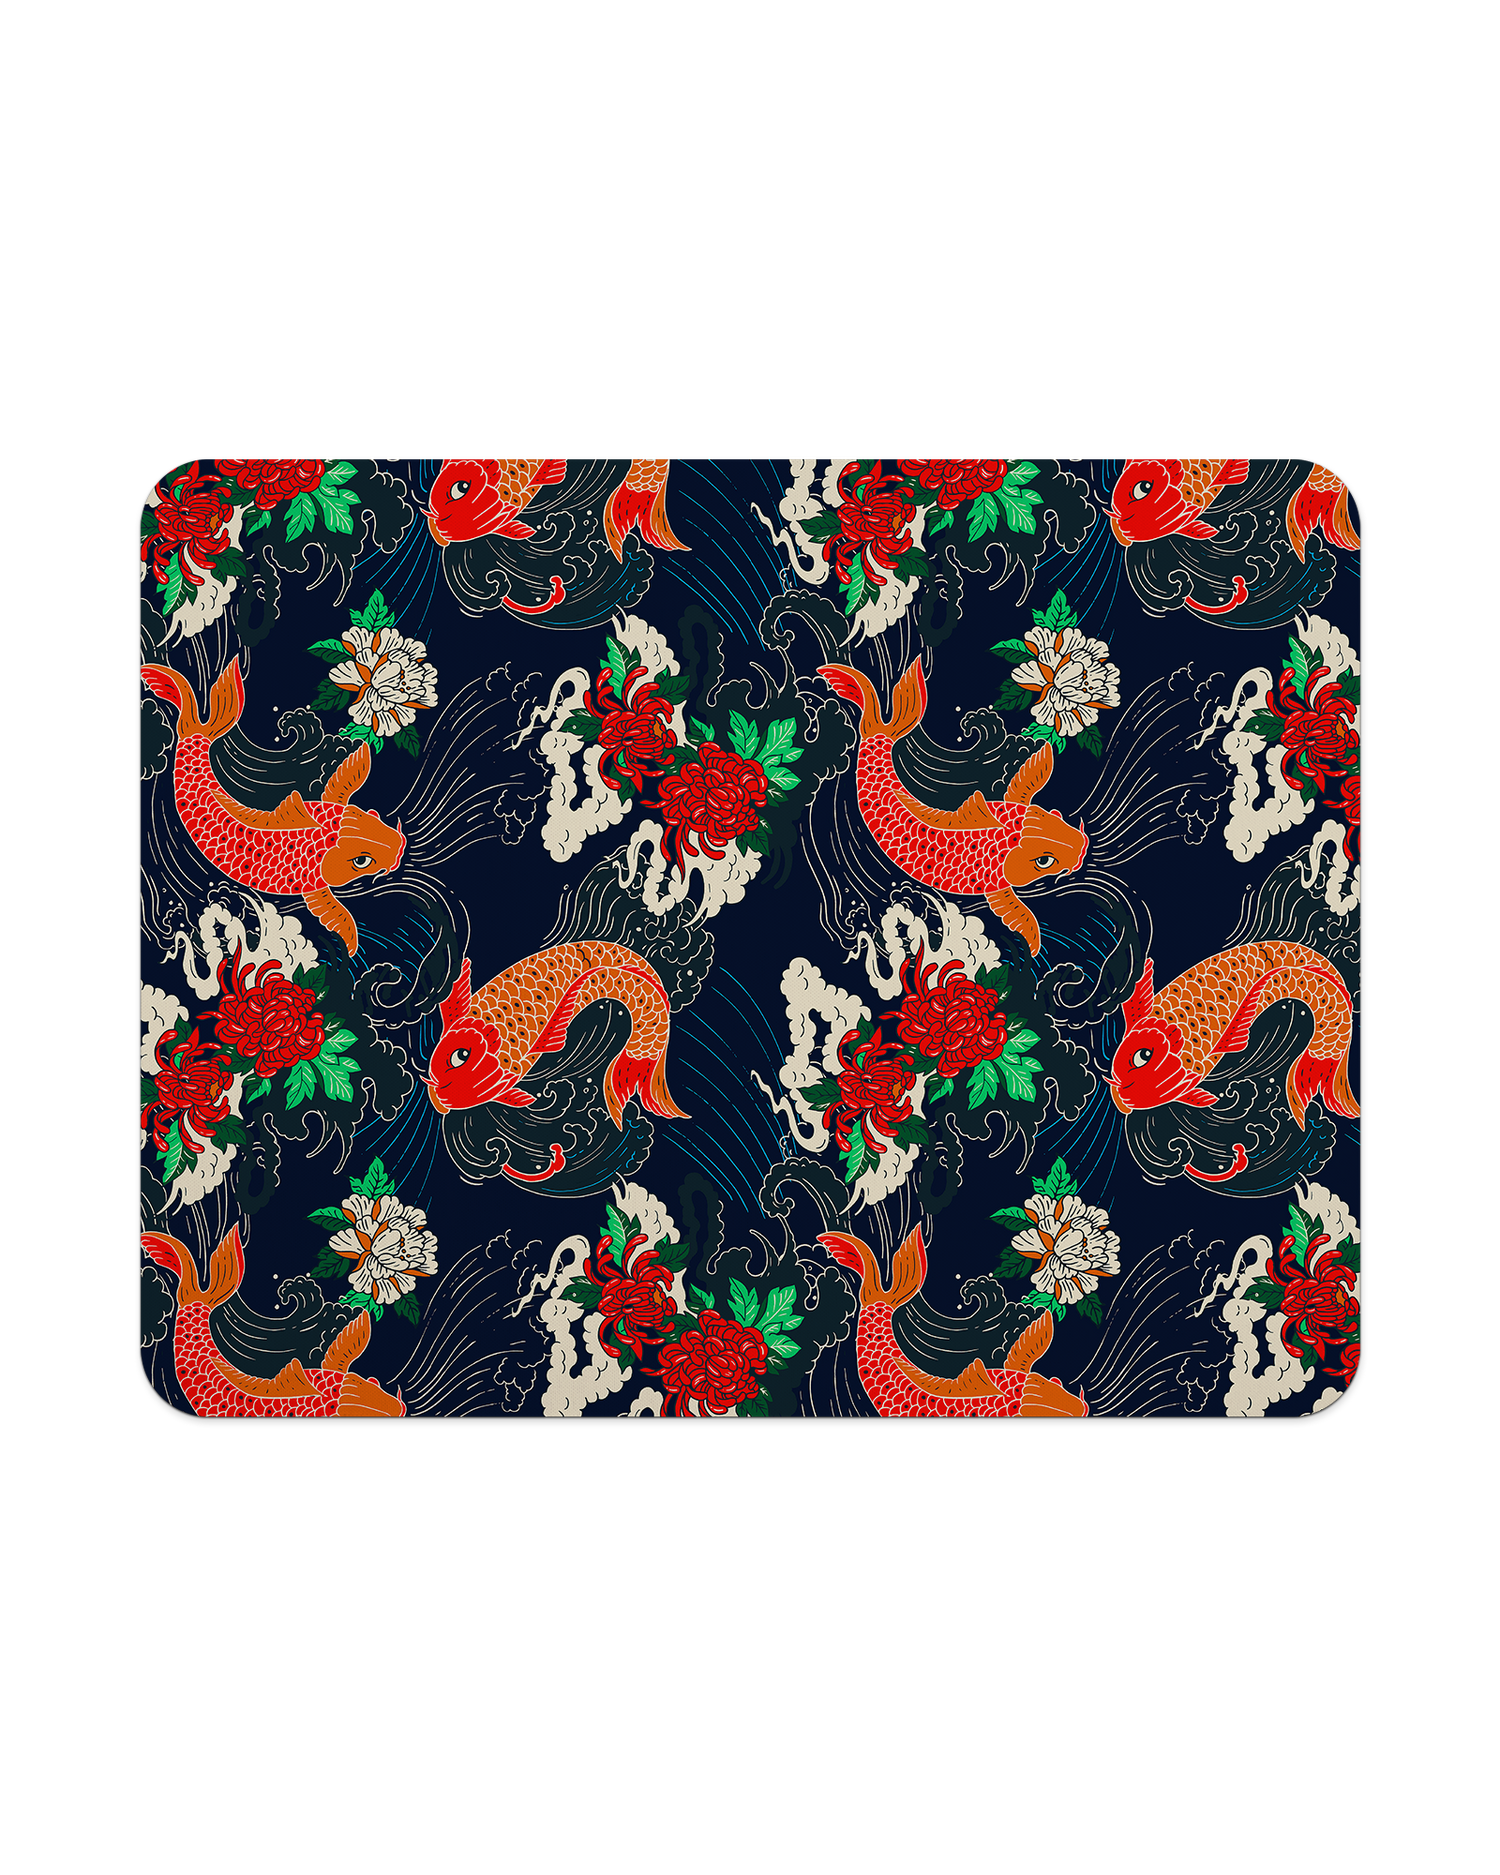 Repeating Koi Mouse Pad from Top